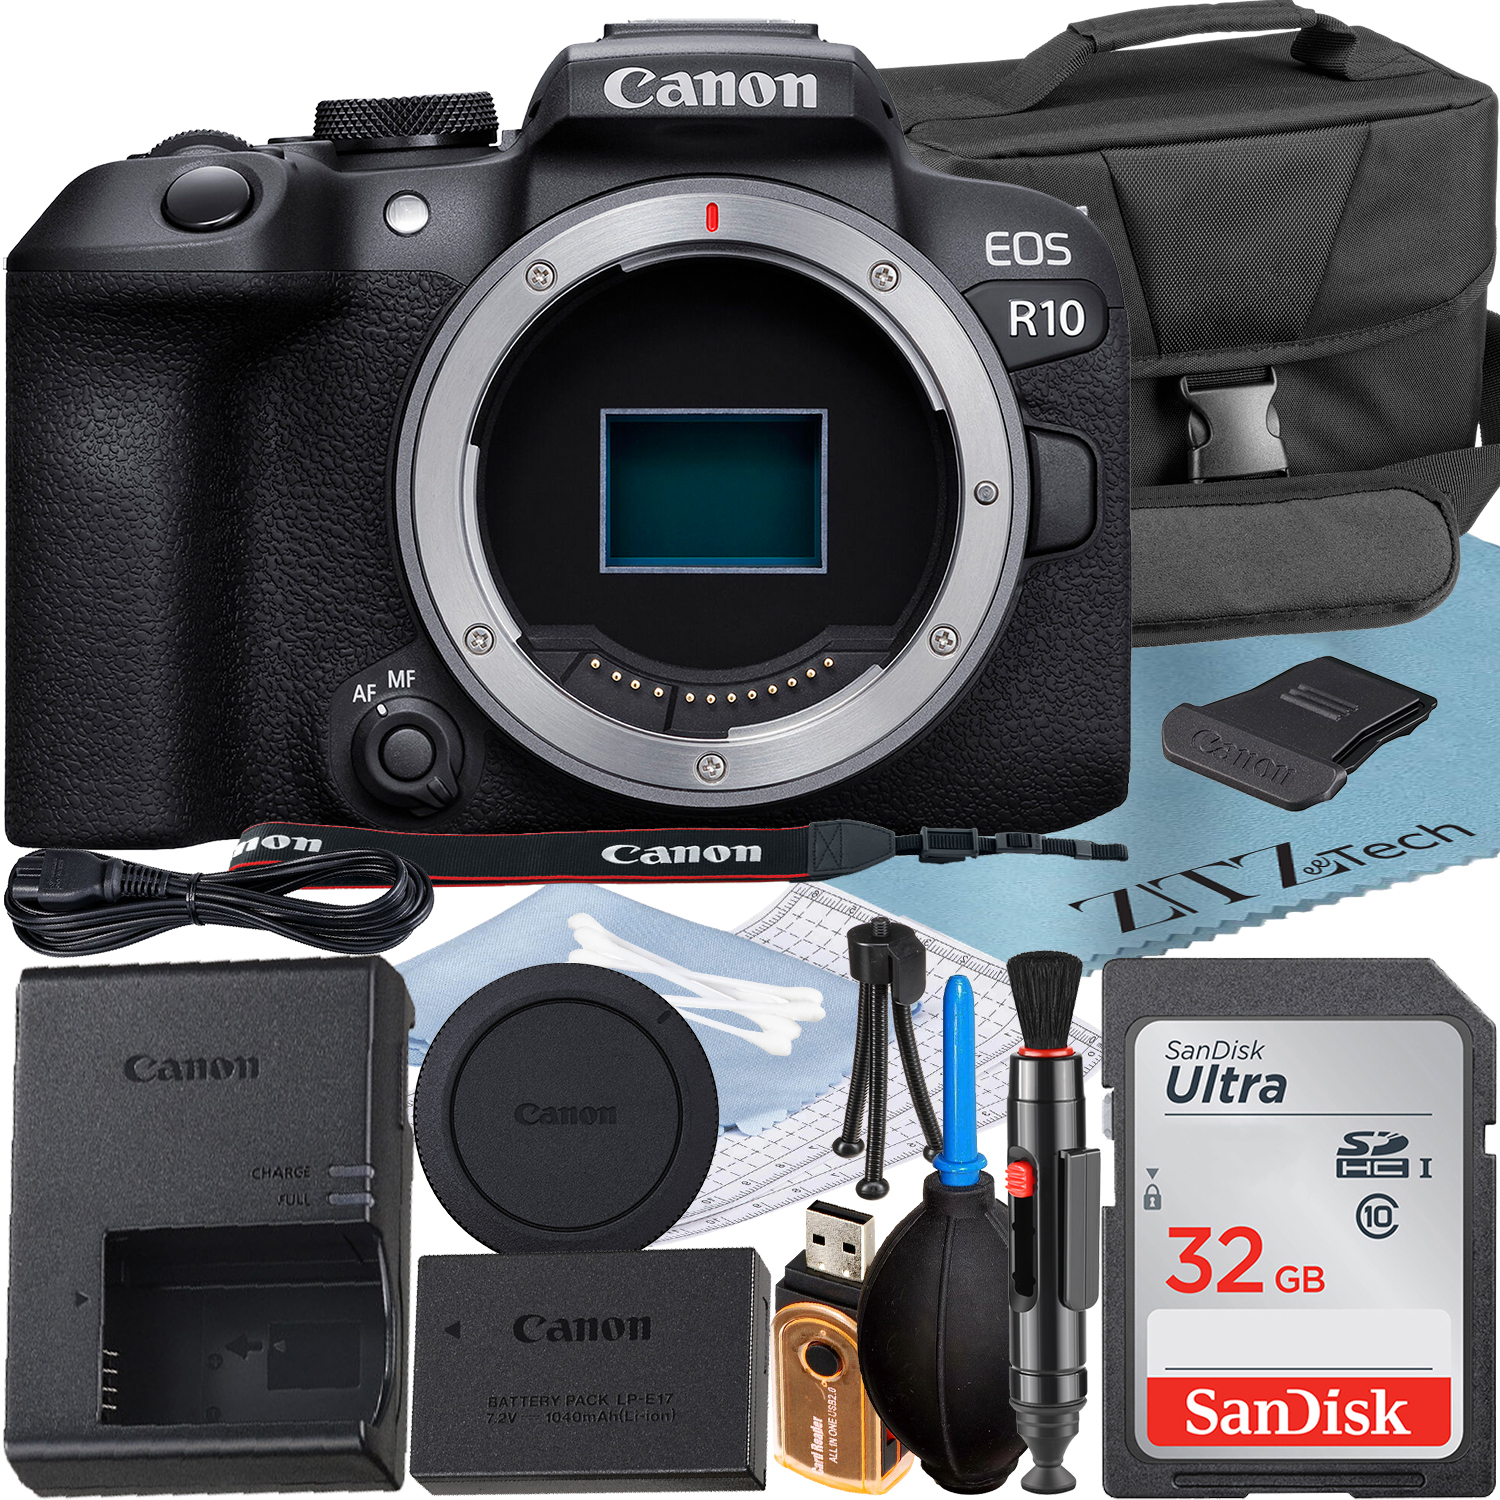 Canon EOS R10 Mirrorless Camera (Body) with 4K Video + SanDisk 32GB Memory Card + Case + ZeeTech Accessory Bundle